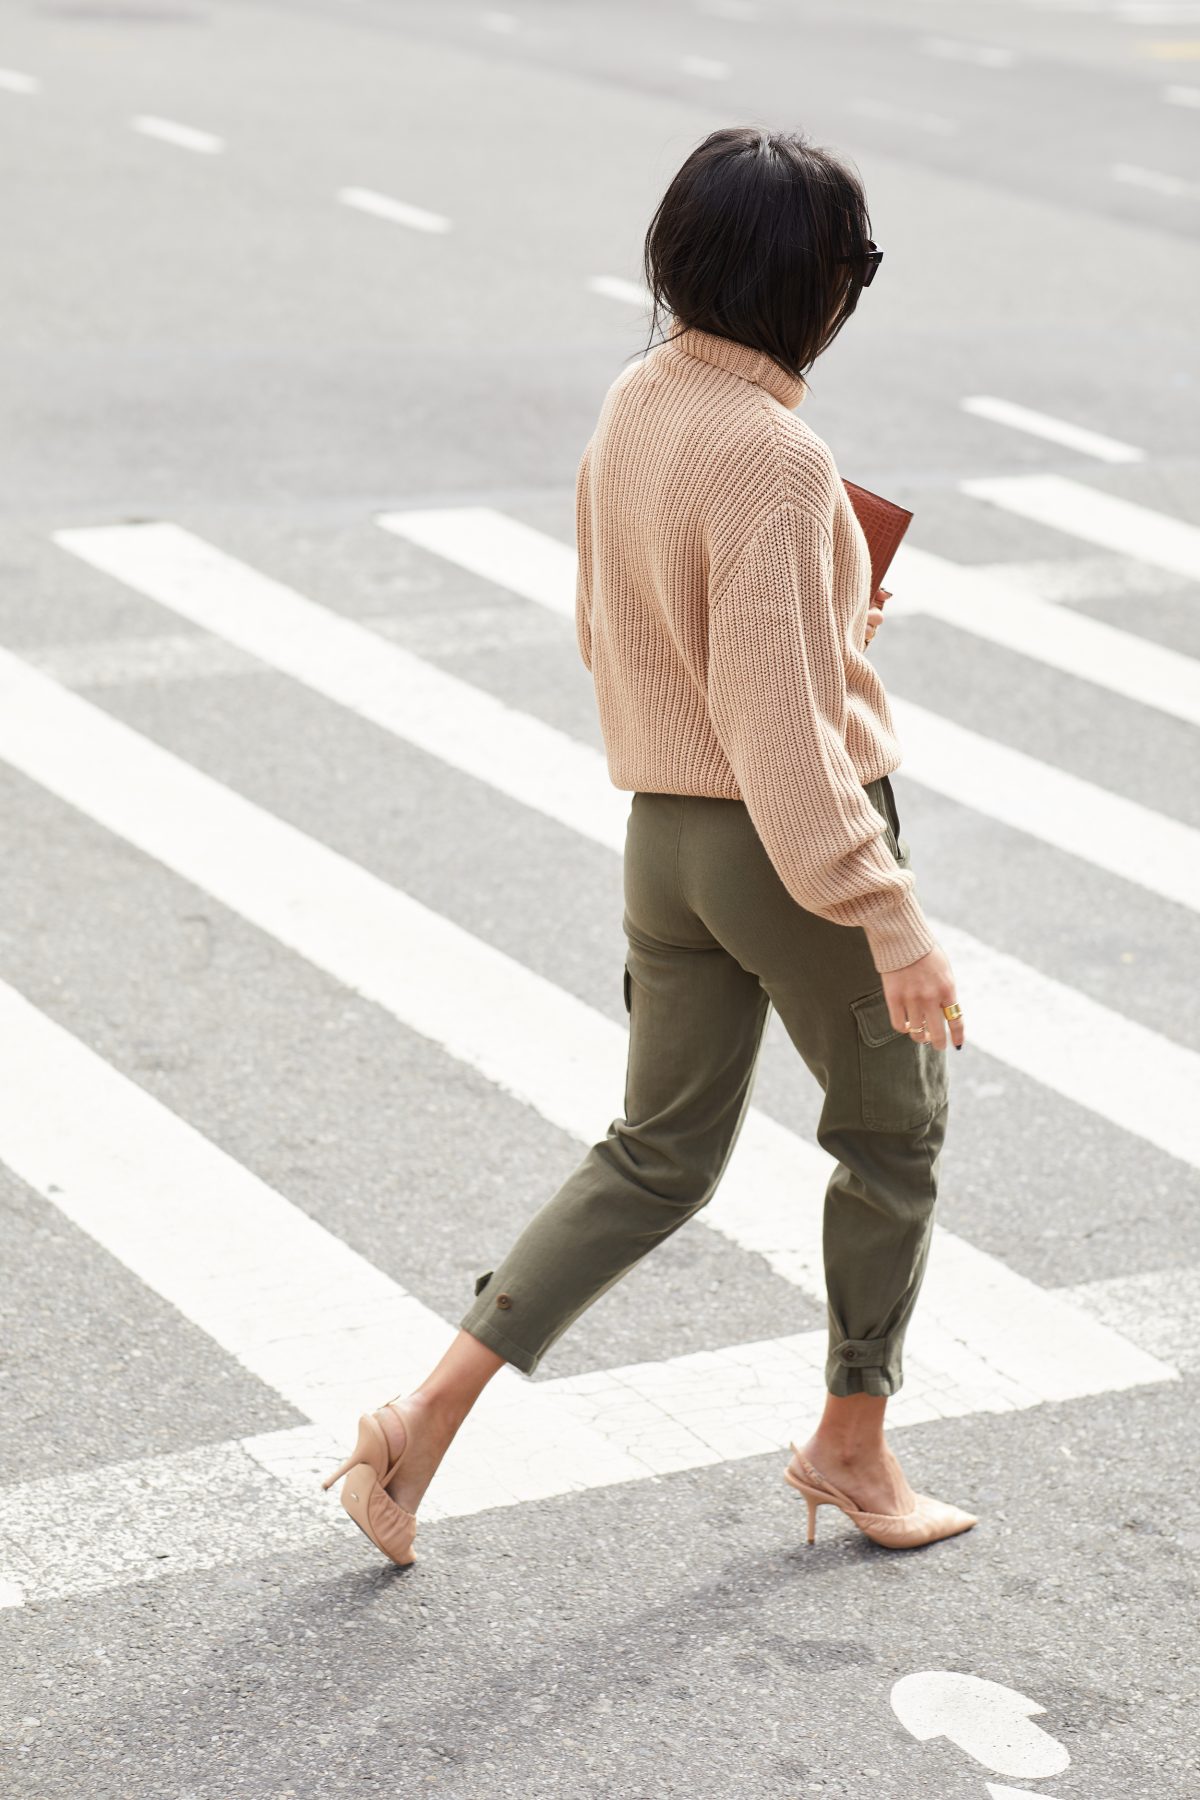 turtleneck sweaters fall outfits shop not your standard style kayla seah blog blogger fashion outfits streetstyle new yok